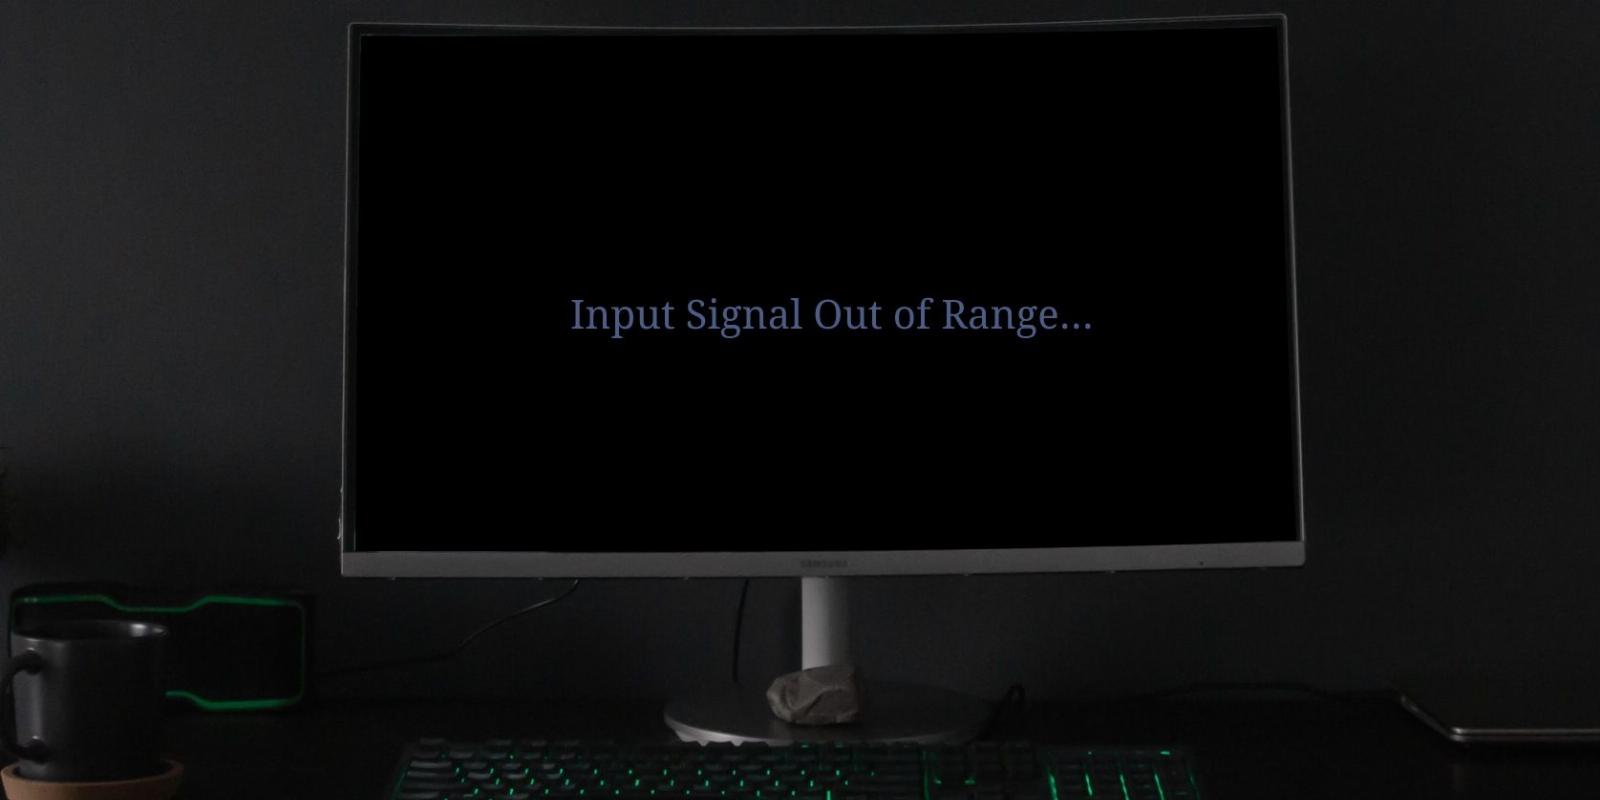 How to Fix the ‘Input Signal Out of Range’ Error in Windows